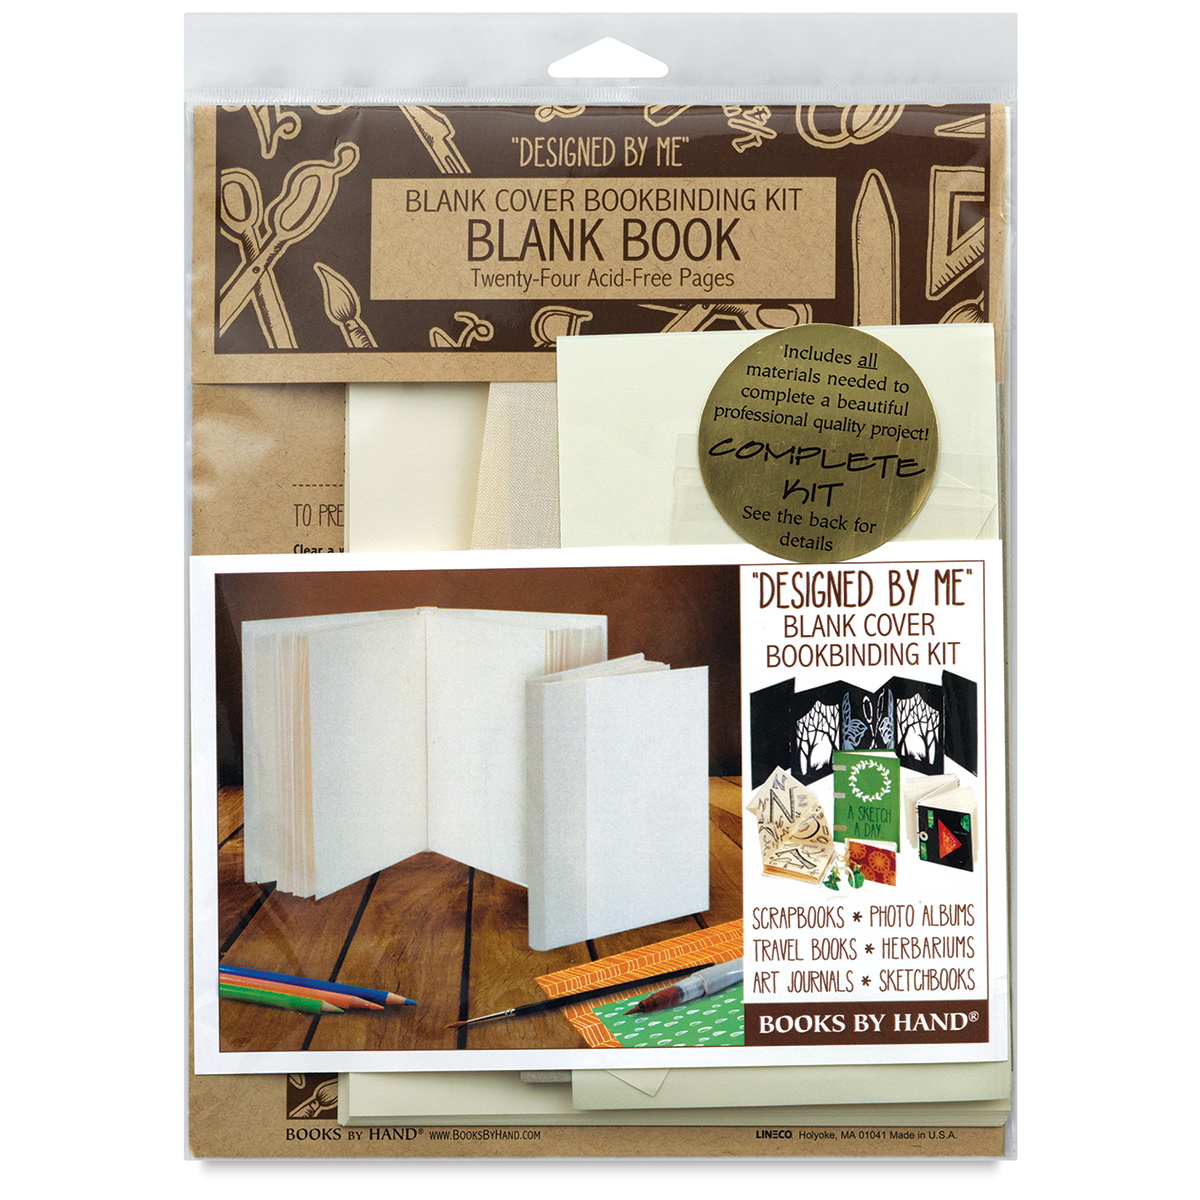 Books By Hand Designed By Me Blank Cover Bookbinding Kit-Guest Book, Ivory  7X10.5 